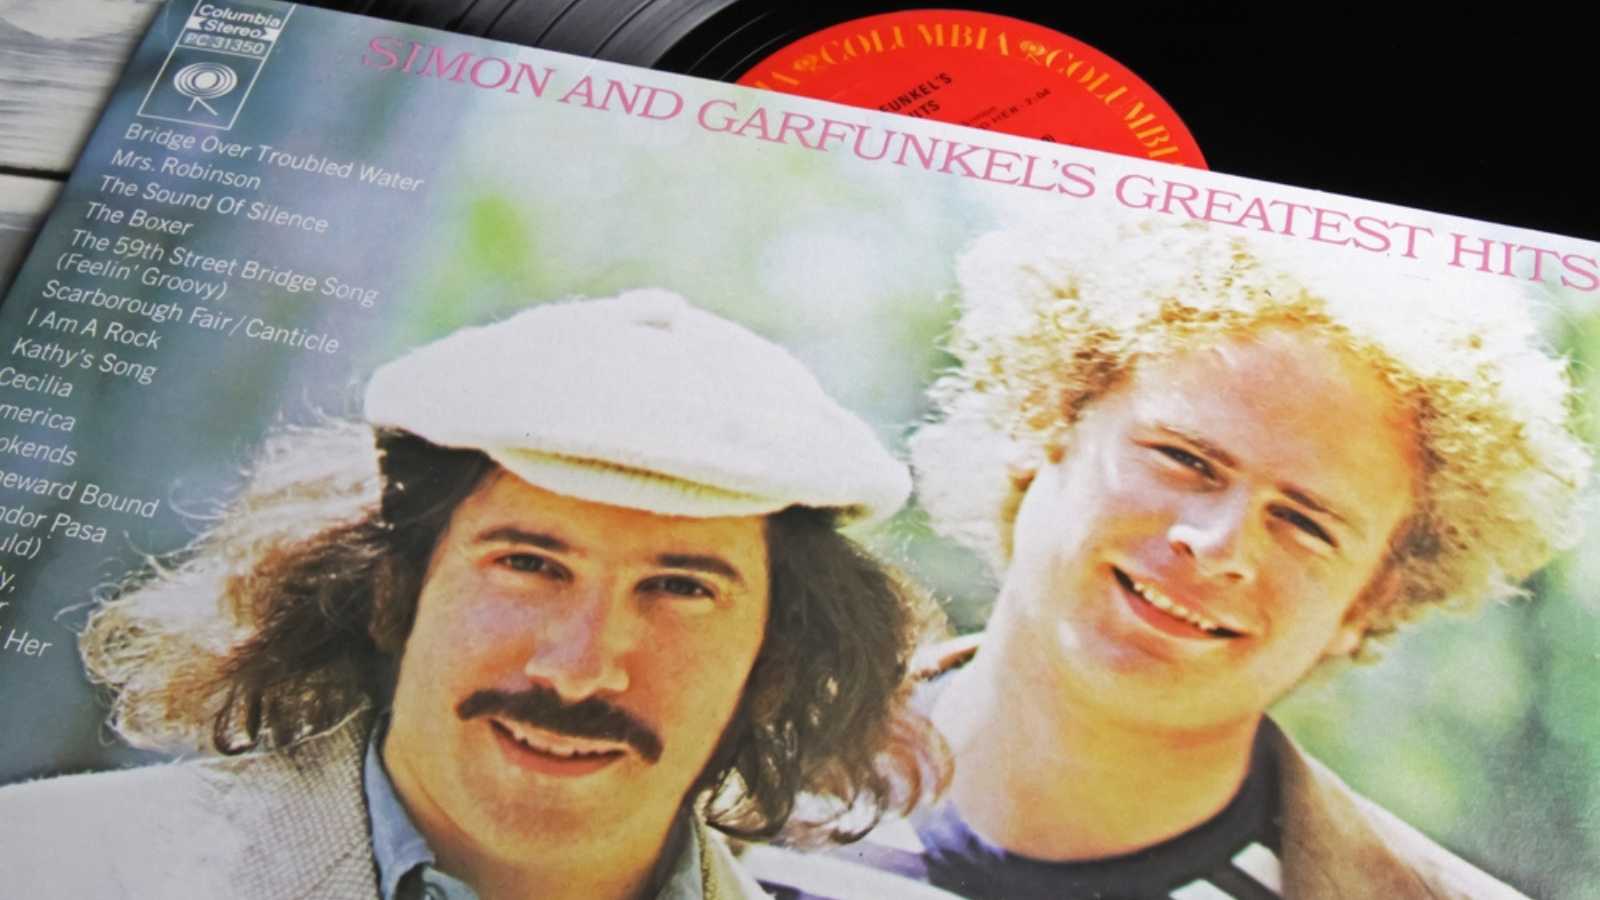 Viersen, Germany - November 9. 2022: Closeup of isolated vinyl record cover with Simon and Garfunkel hit songs